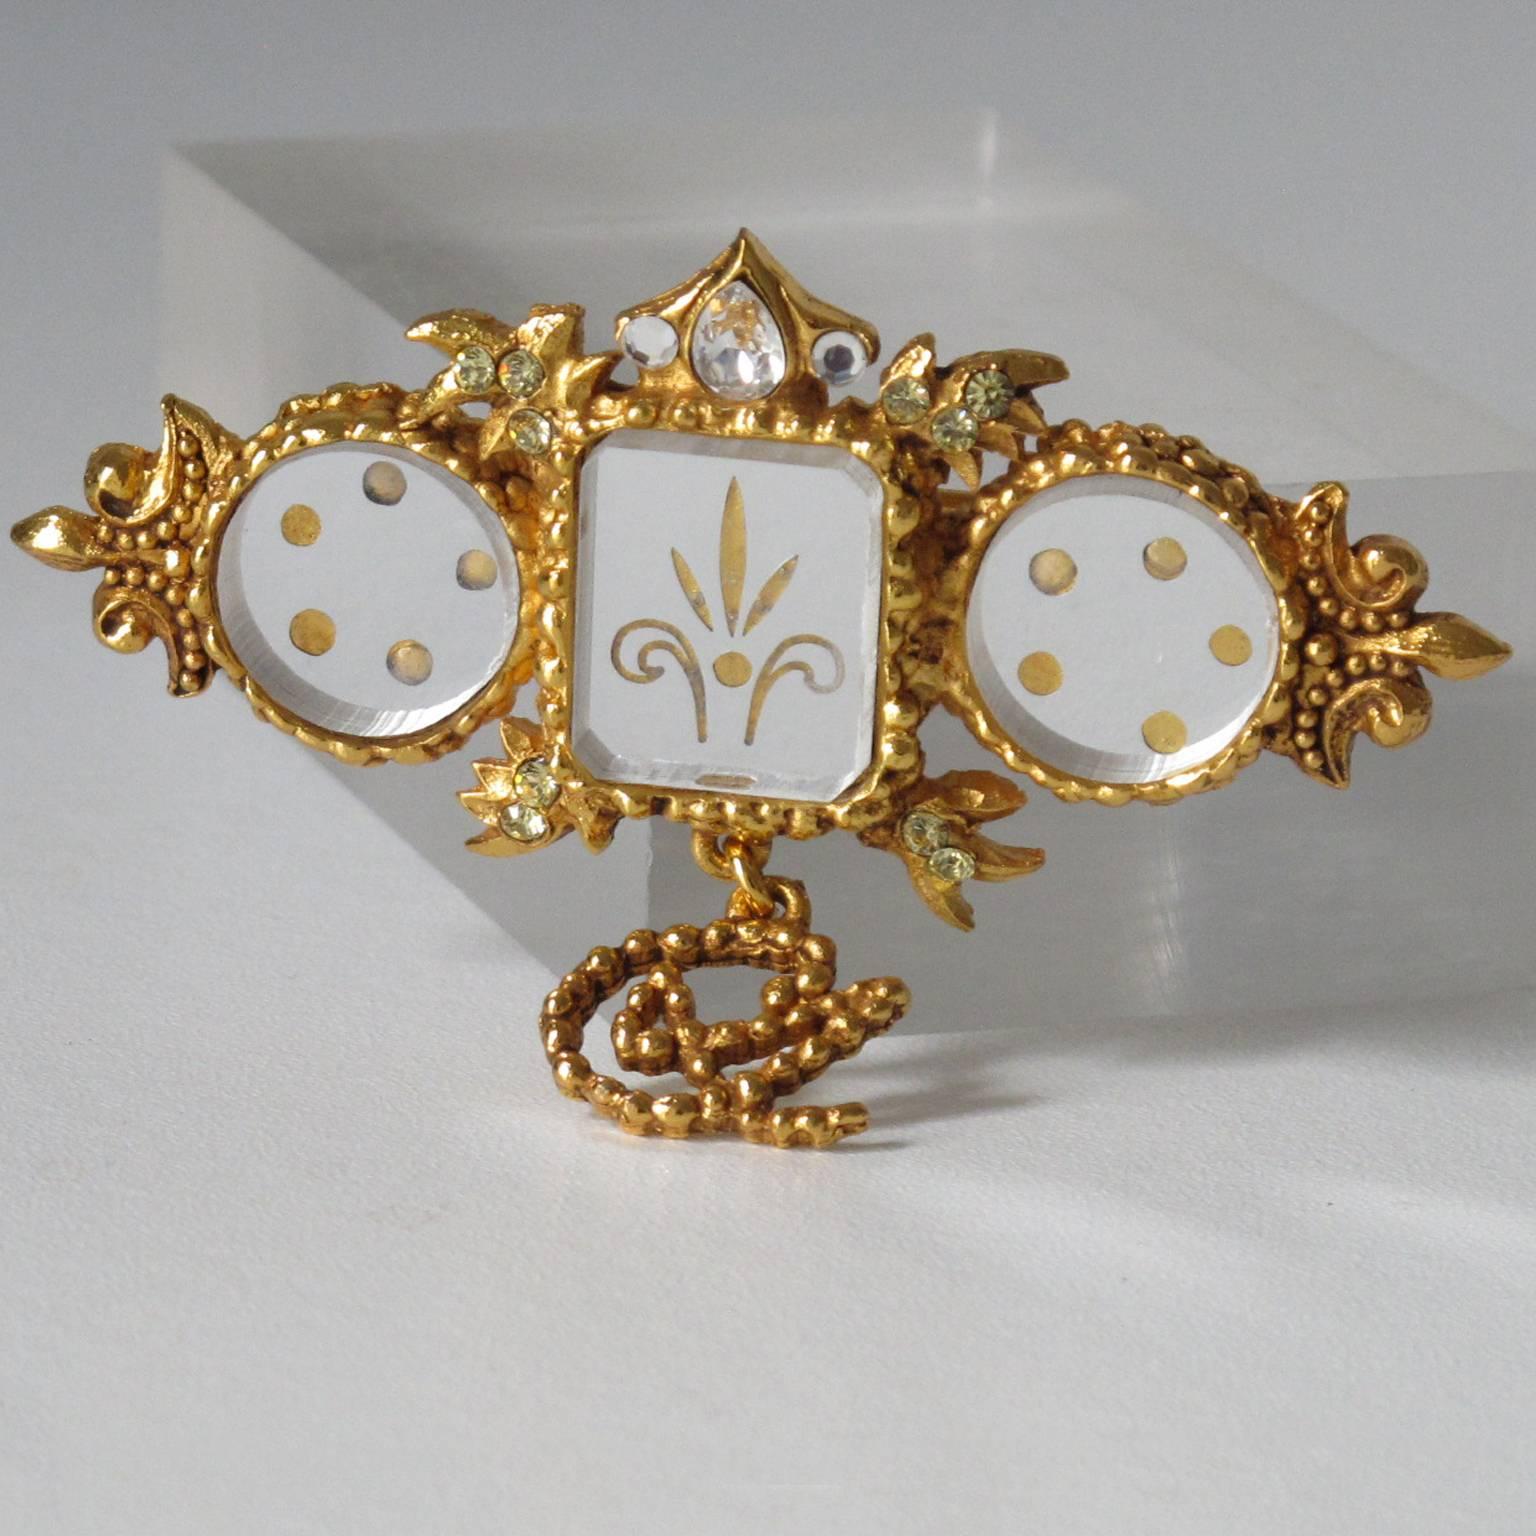 CHRISTIAN LACROIX Paris signed Baroque Pin Brooch. Elegant rare couture dangling shape, gilt metal all textured, ornate with CL logo charm and topped with etched Venetian mirrors and tiny rhinestones in champagne color. Signed at the back with